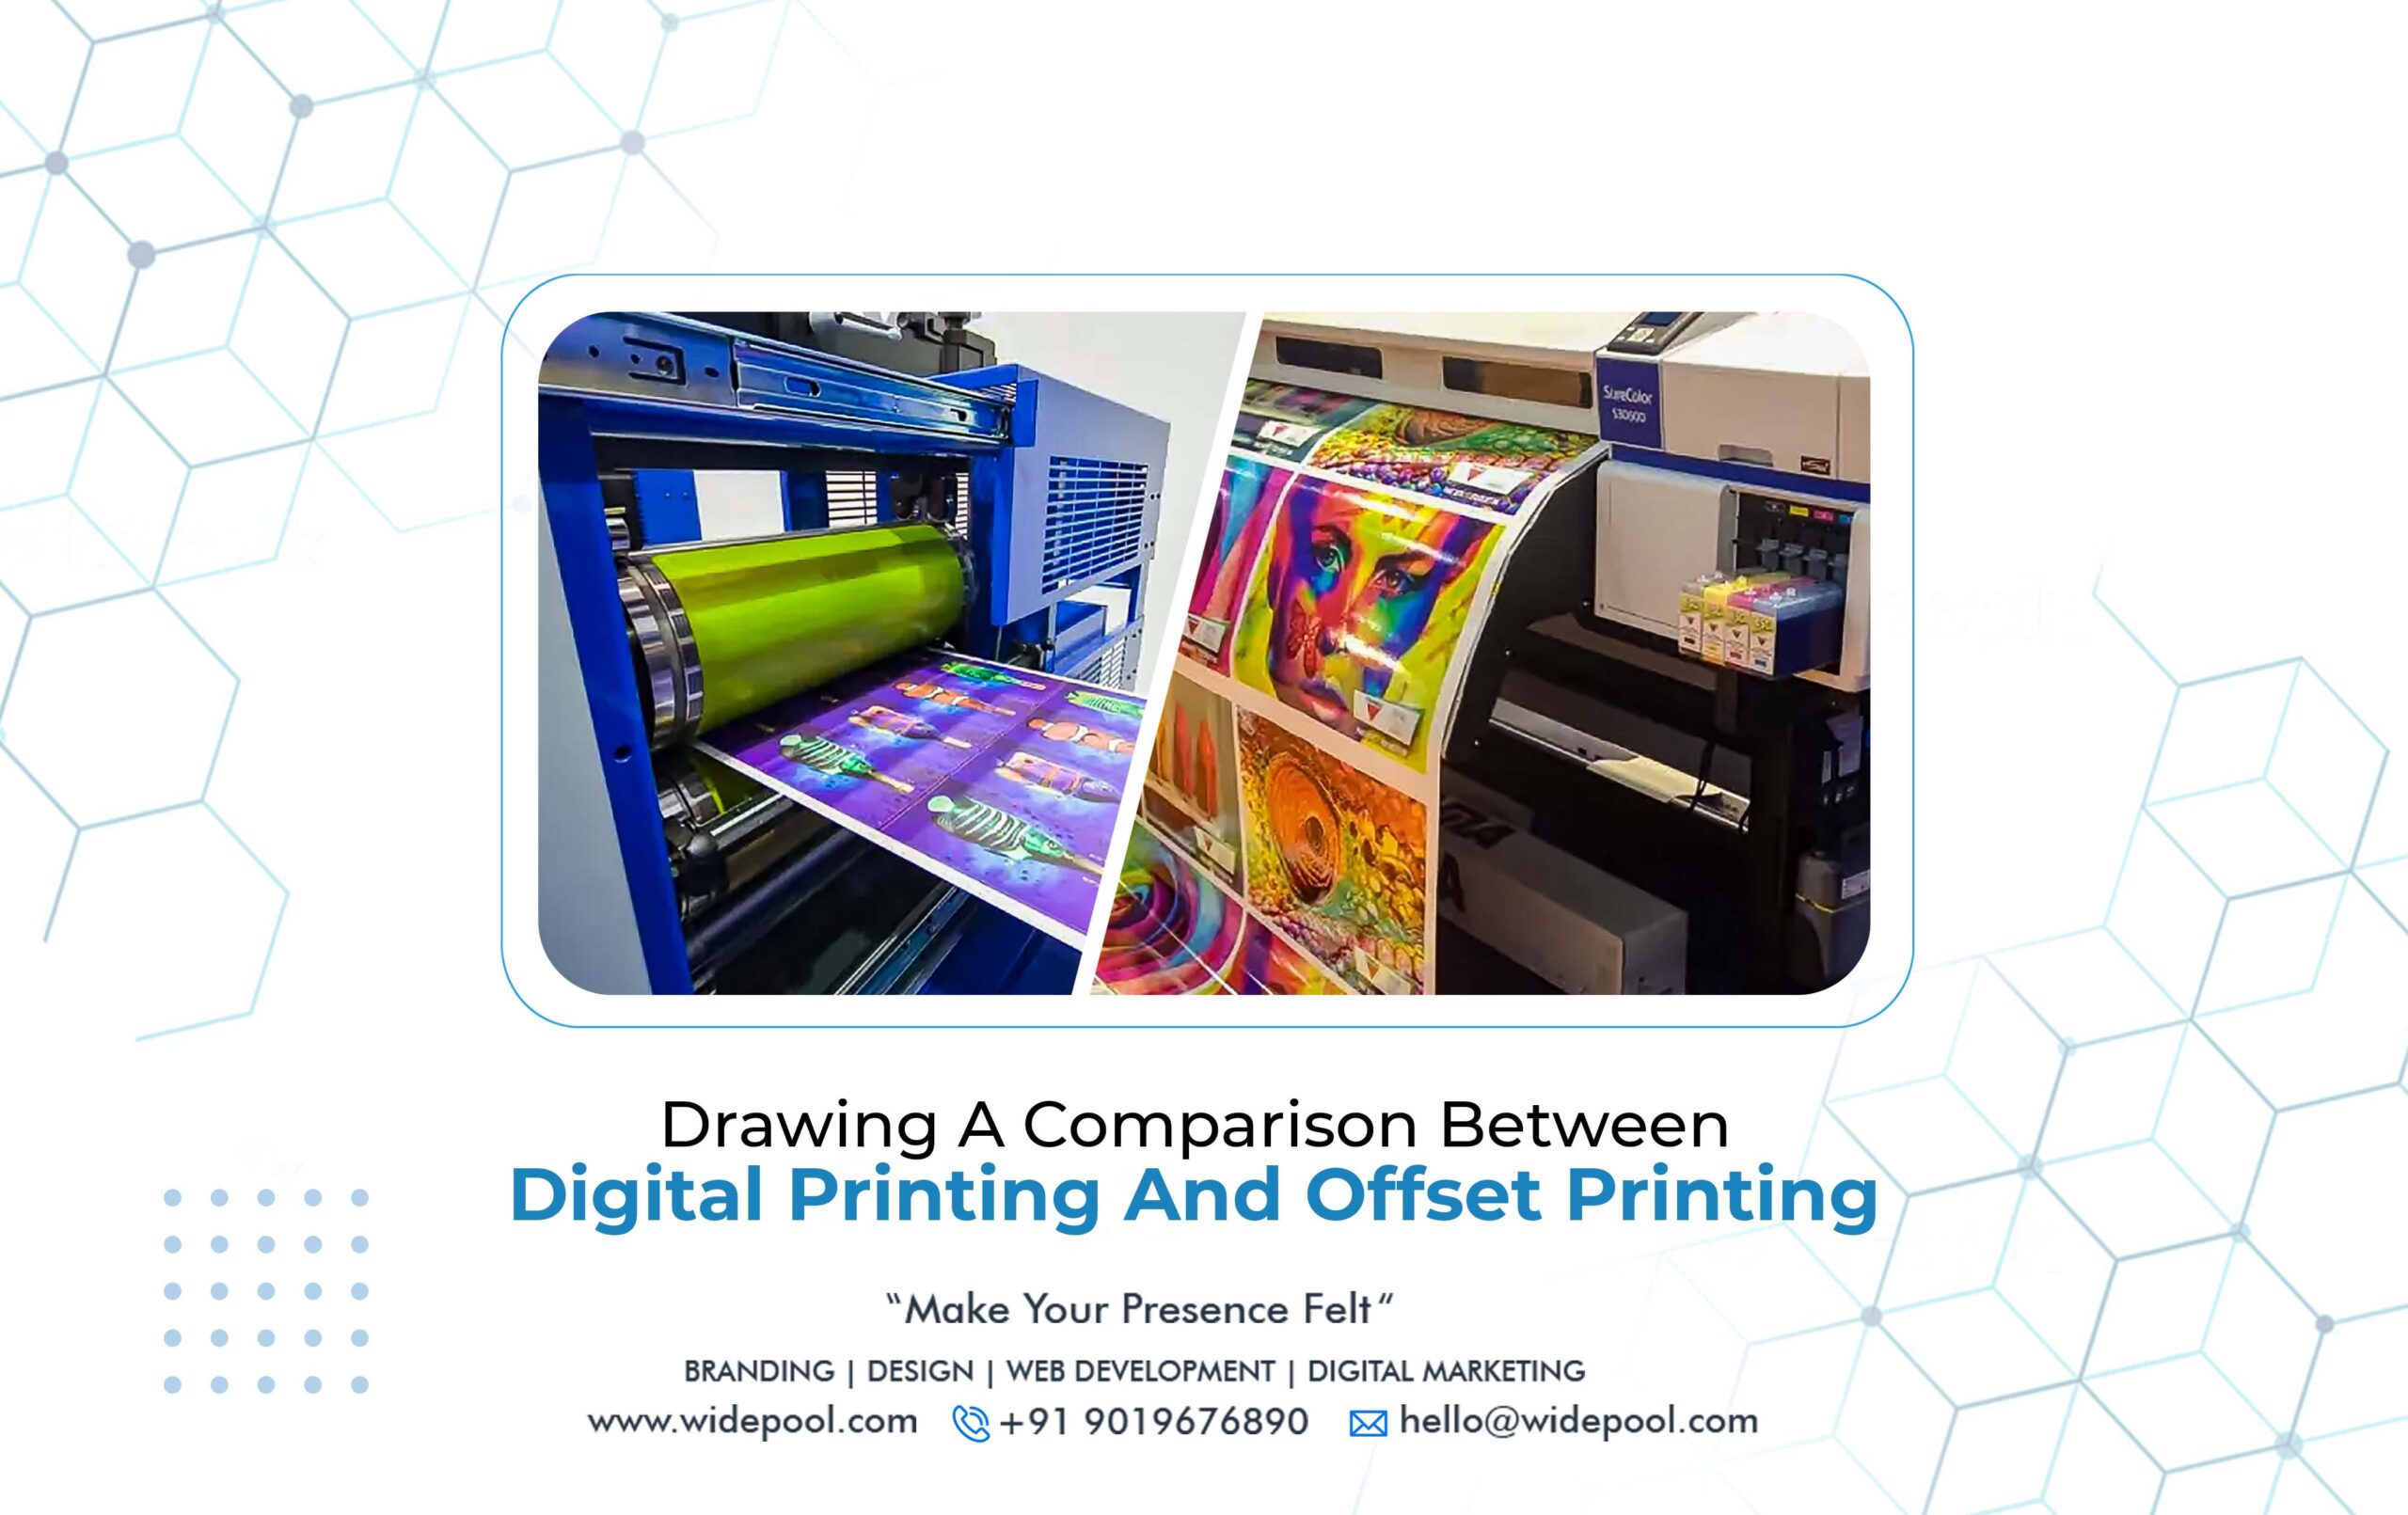 Drawing a Comparison between Digital Printing and Offset Printing